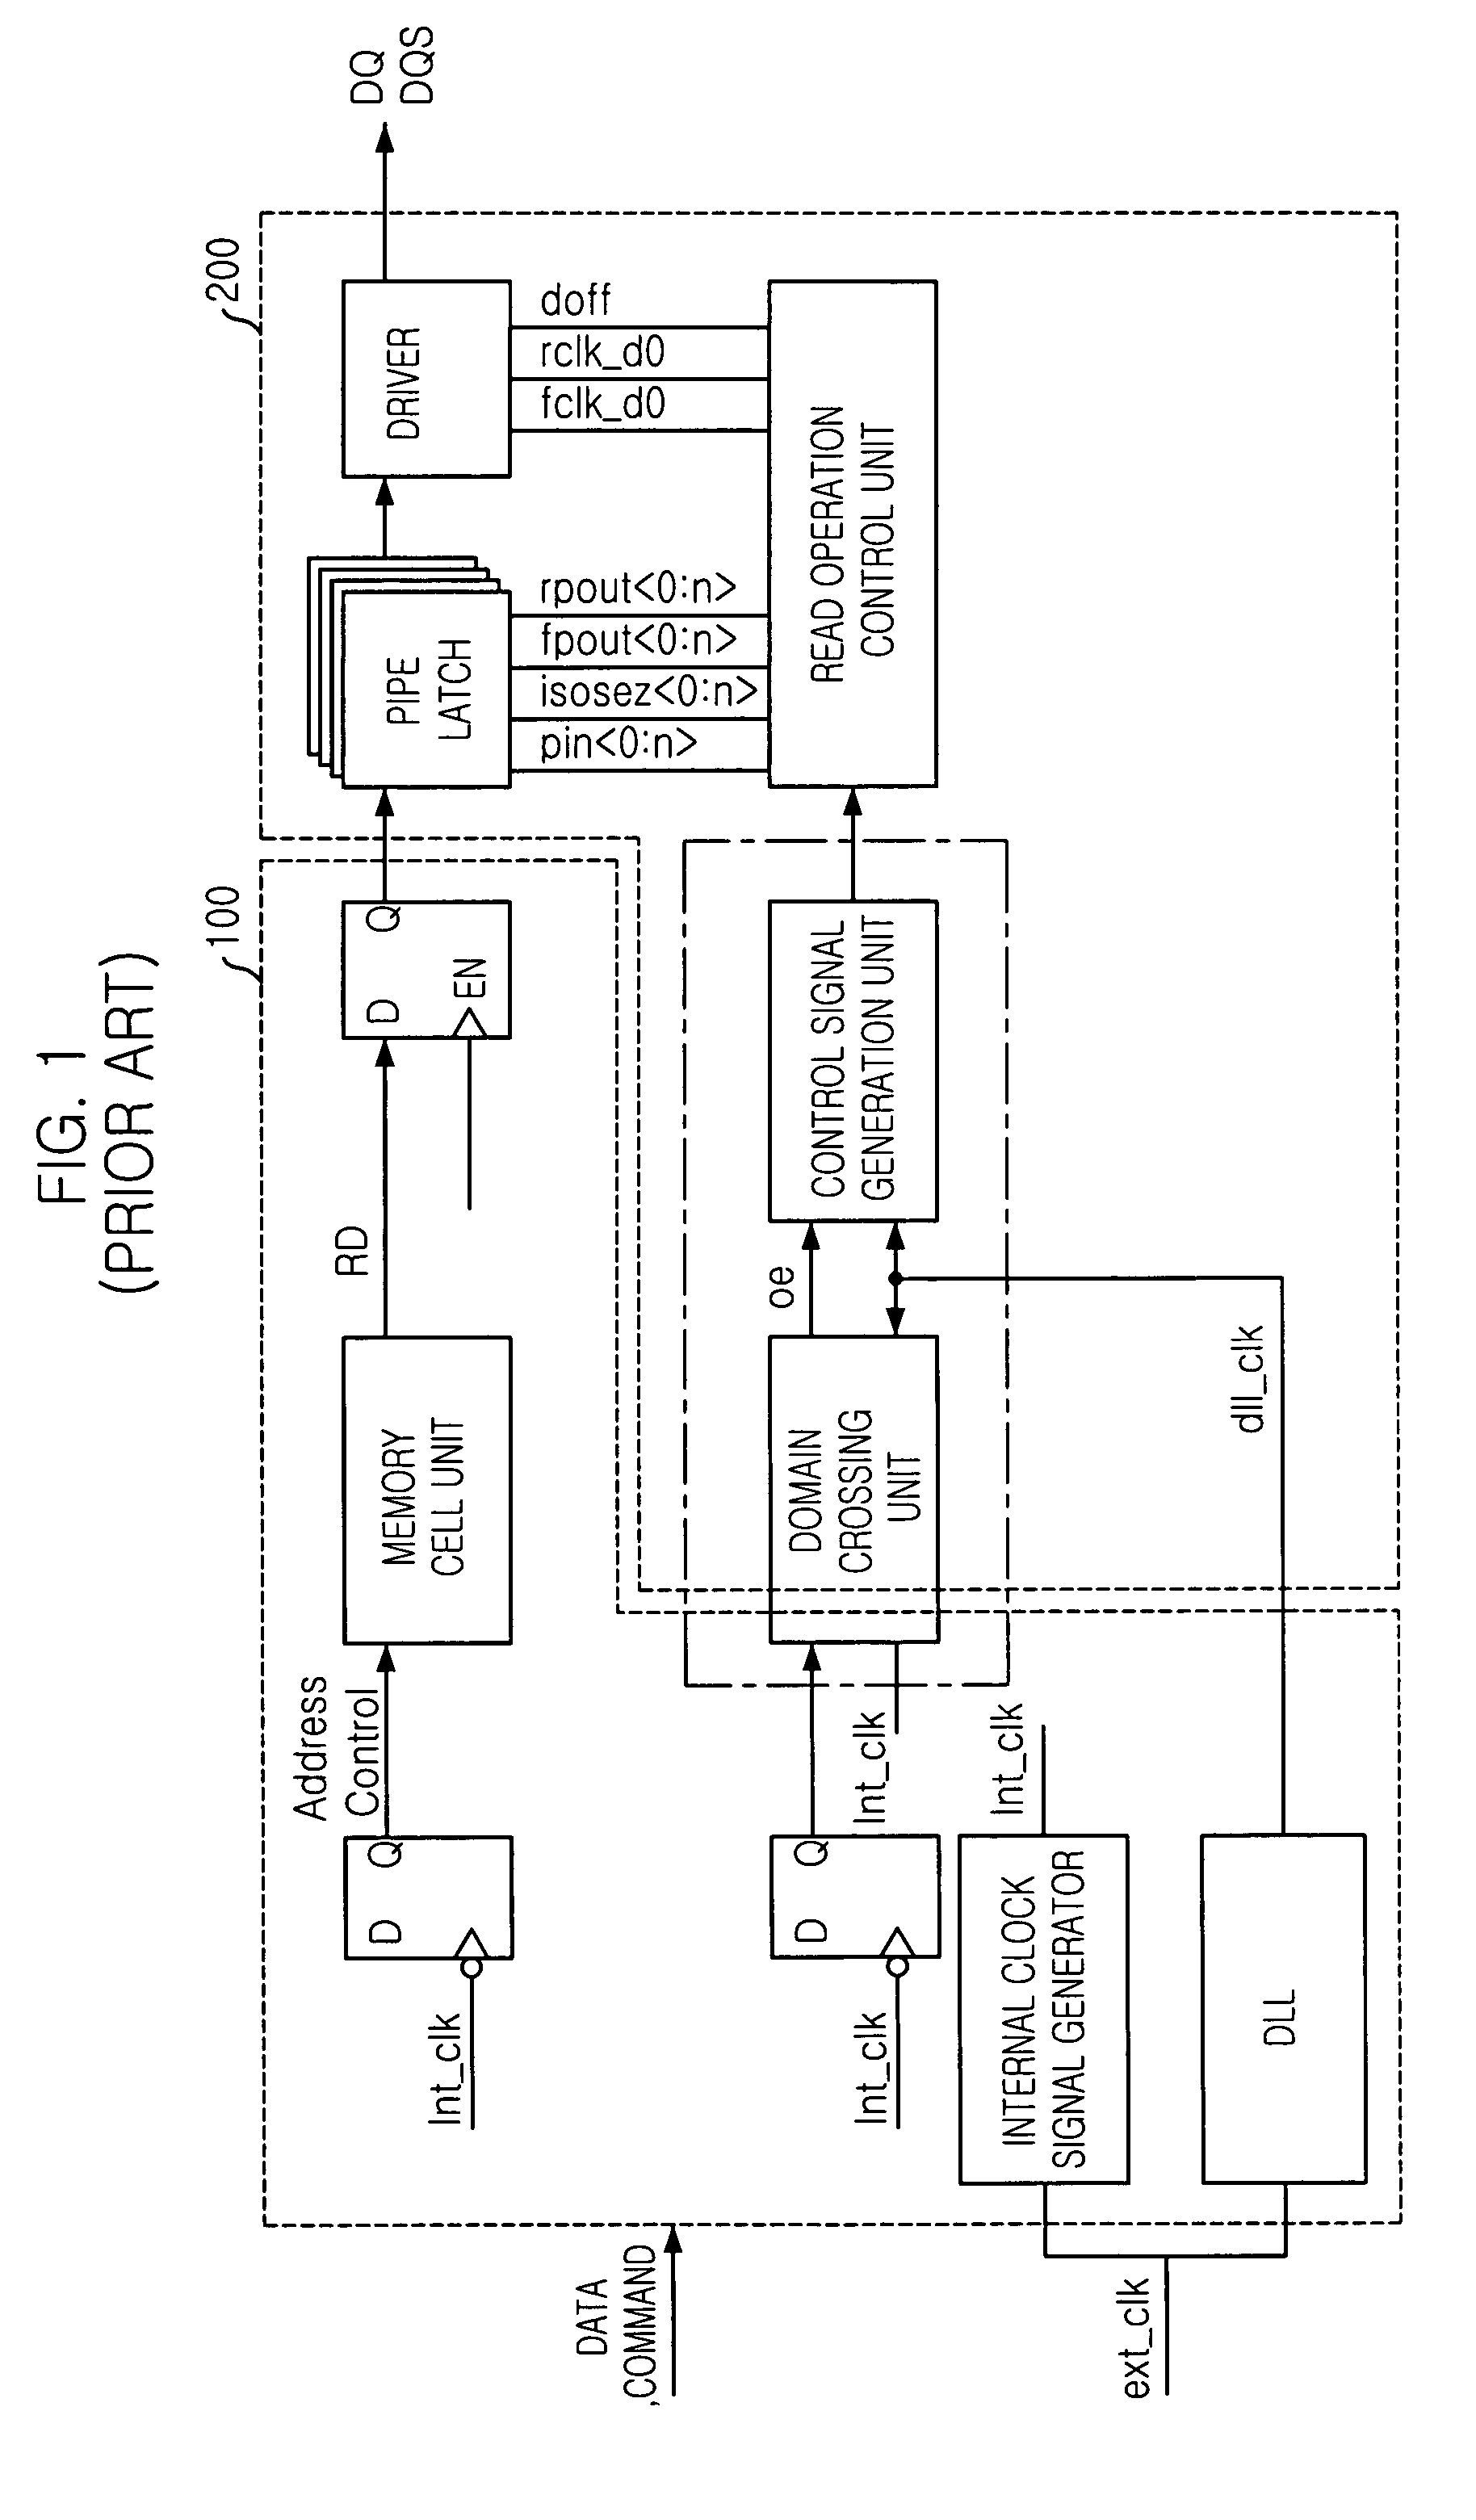 Domain crossing device